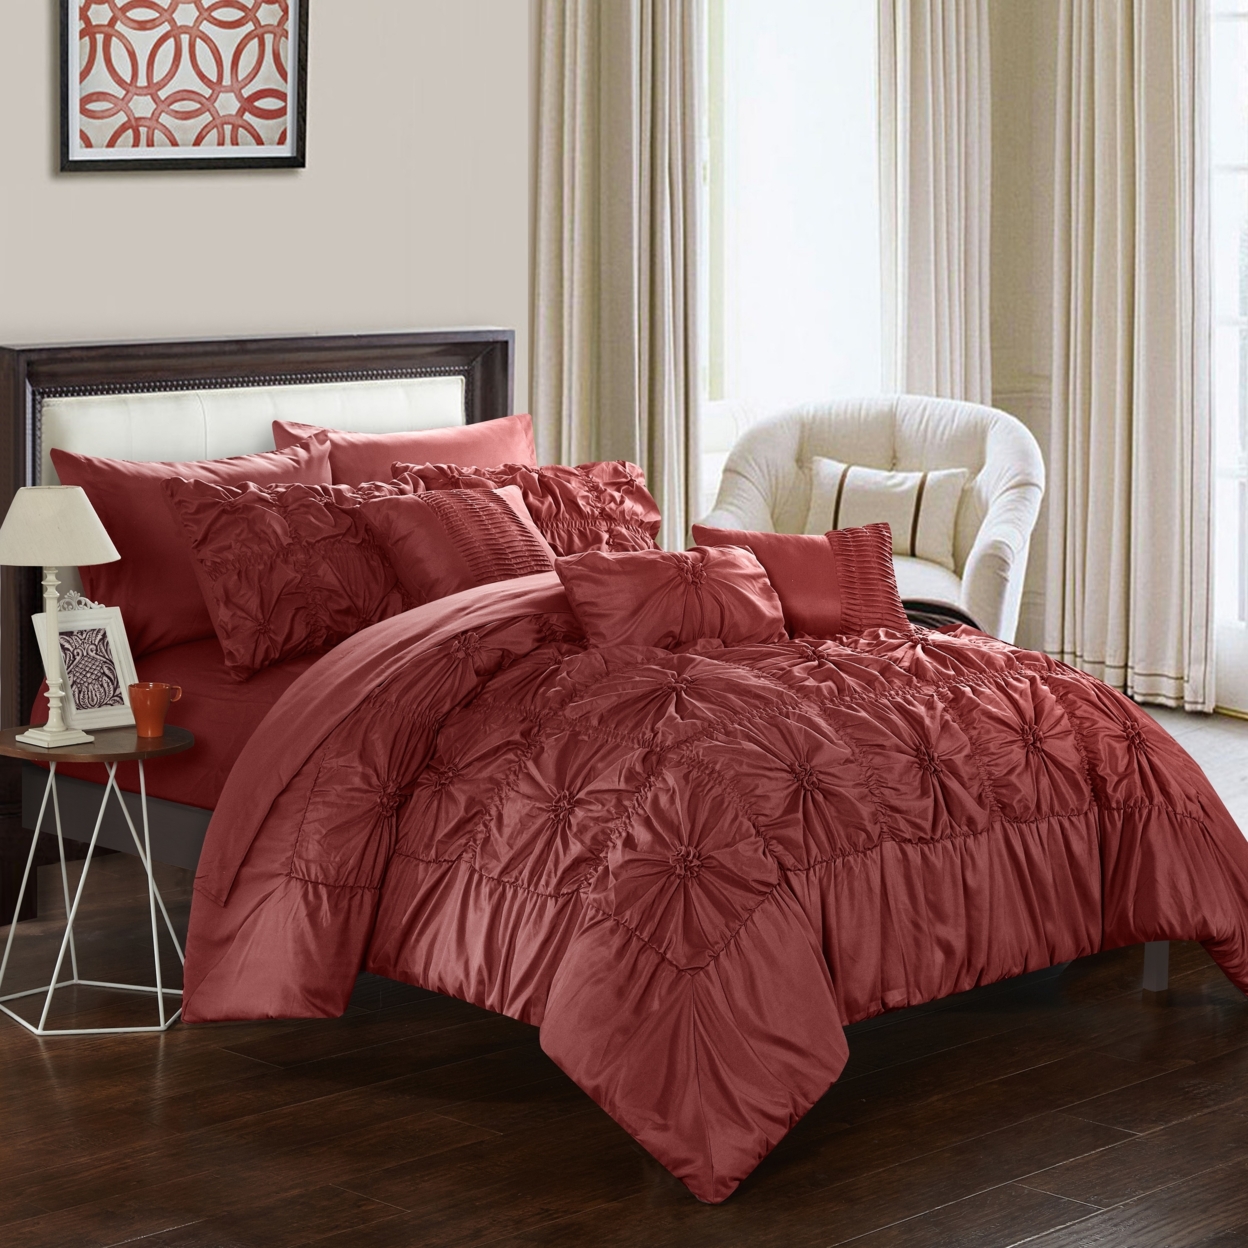 Chic Home 8/10 Piece Sheffield Floral Pinch Pleat Ruffled Designer Embellished Bed In A Bag Comforter Set With Sheet Set - Brick, Twin